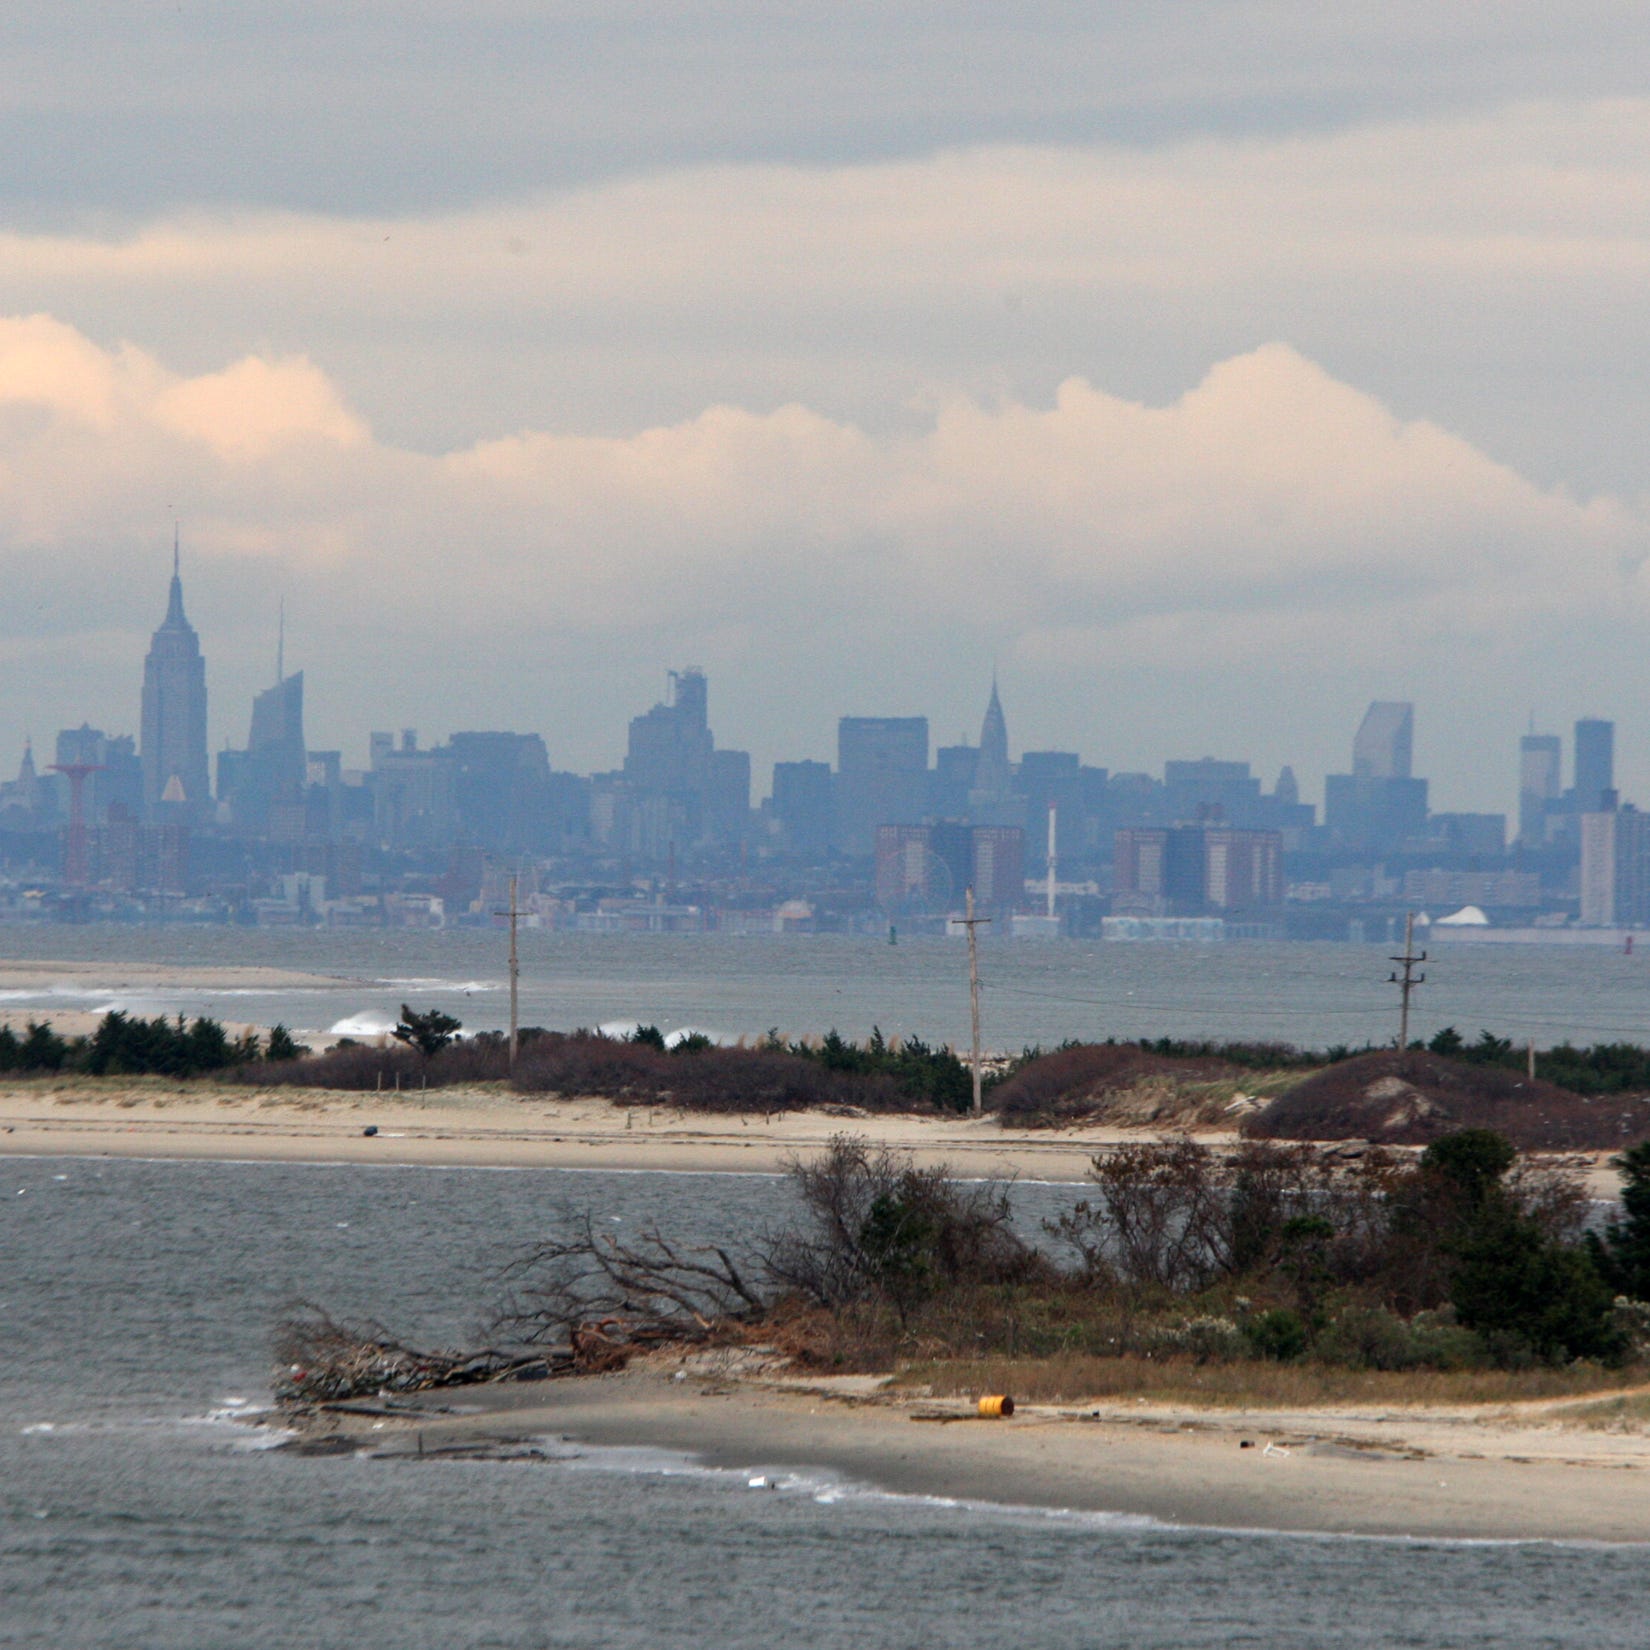 The aftermath of Hurricane Sandy and the devastation at Gateway National Recreation Area and Sandy Hook on Nov. 2, 2012.